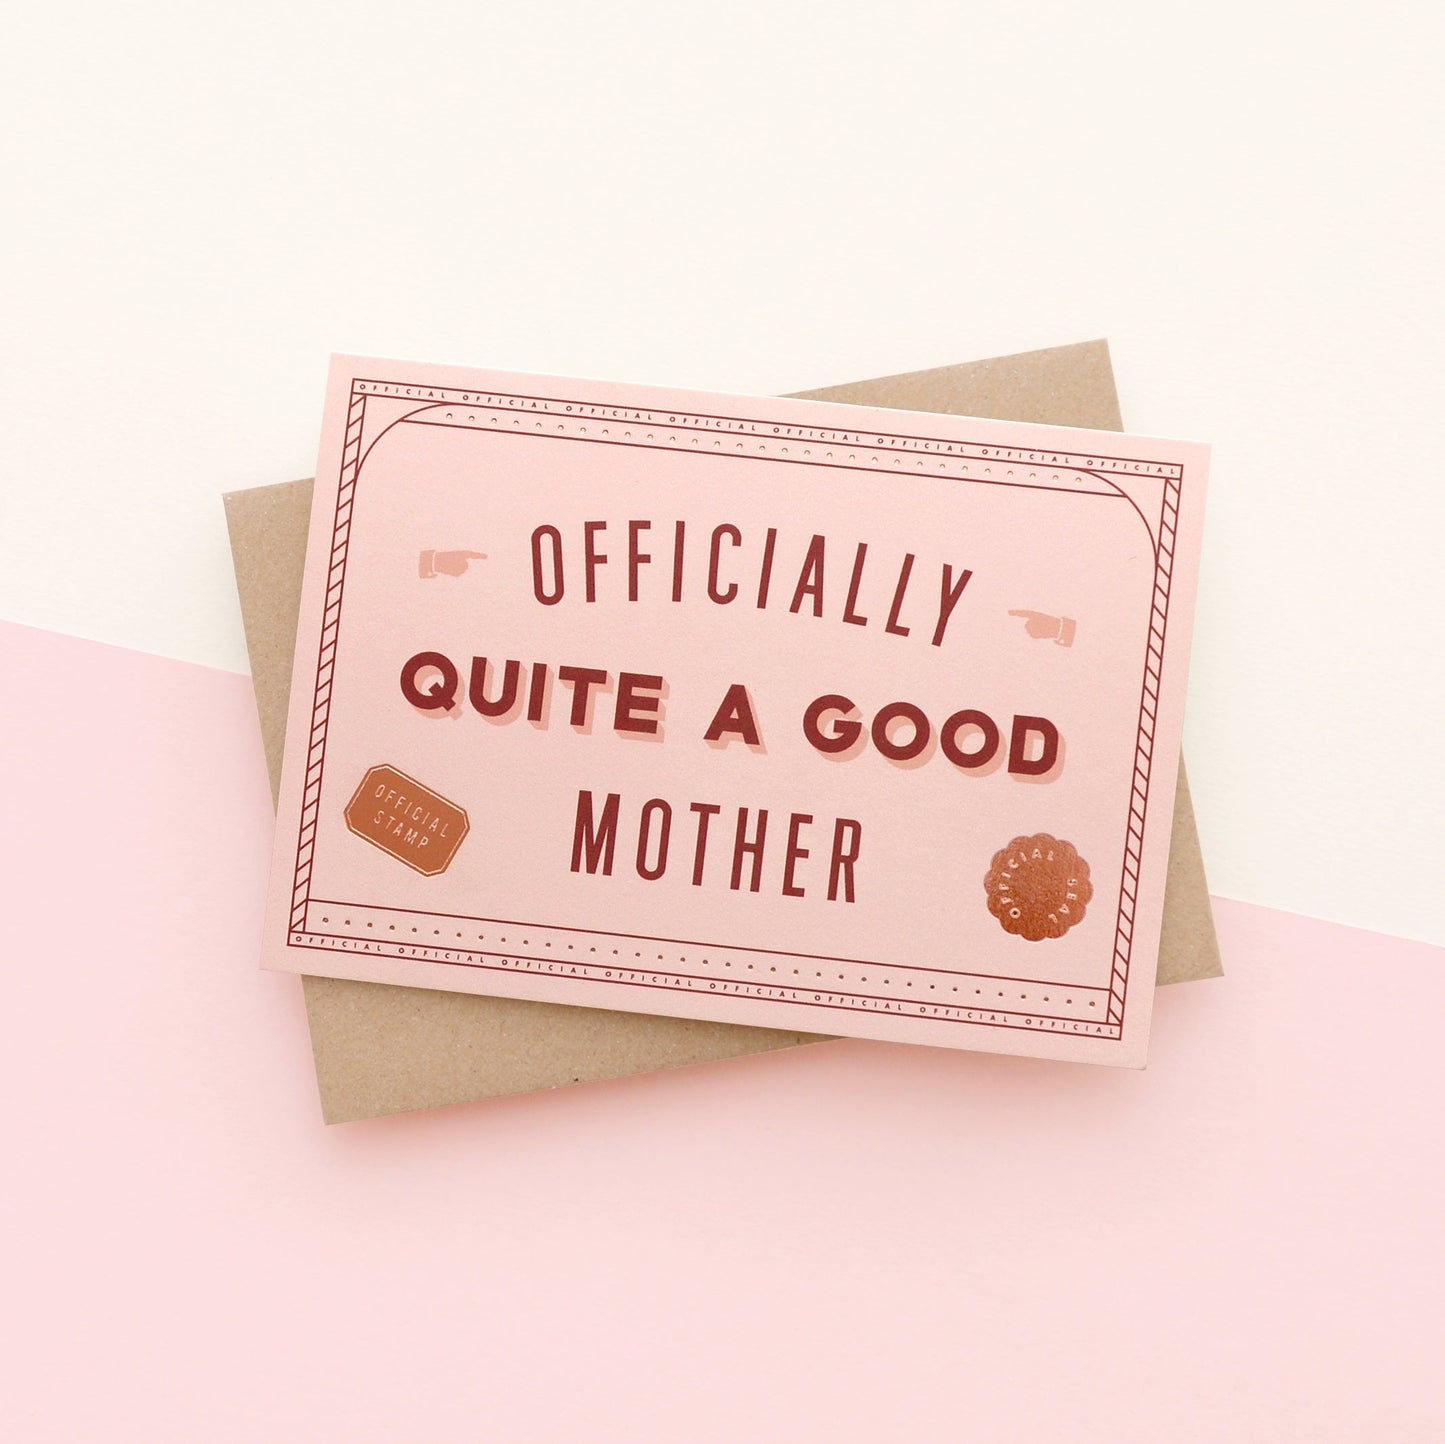 Officially Quite a Good Father/Mother Greeting Cards - 2 varieties